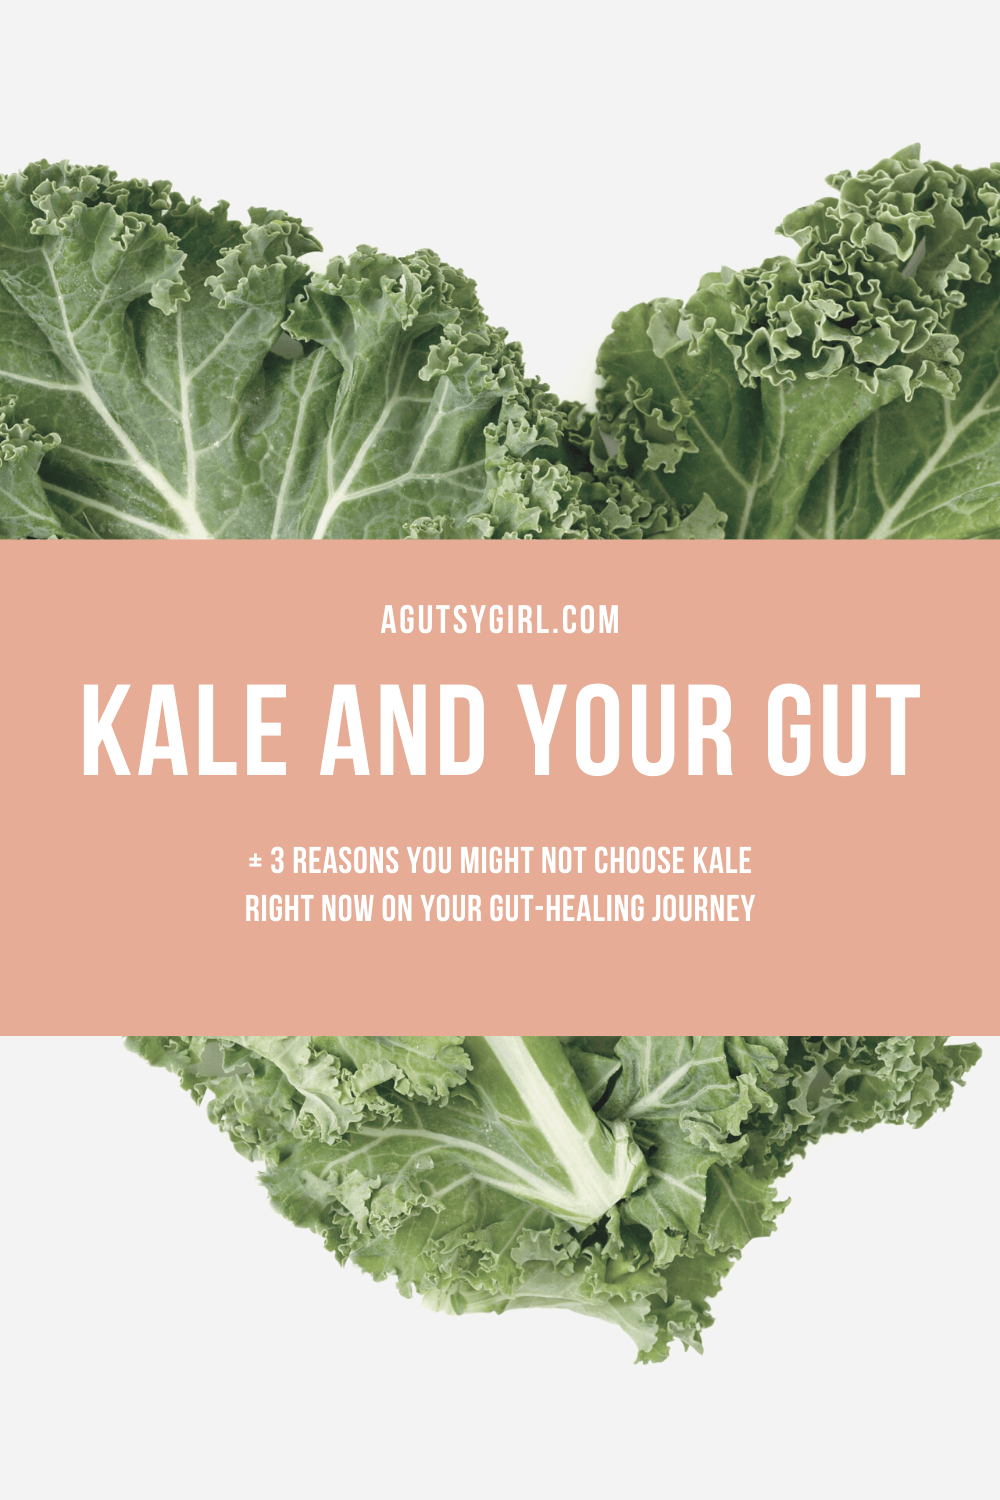 Kale and Your Gut agutsygirl.com #kale #thyroid #guthealth #greens